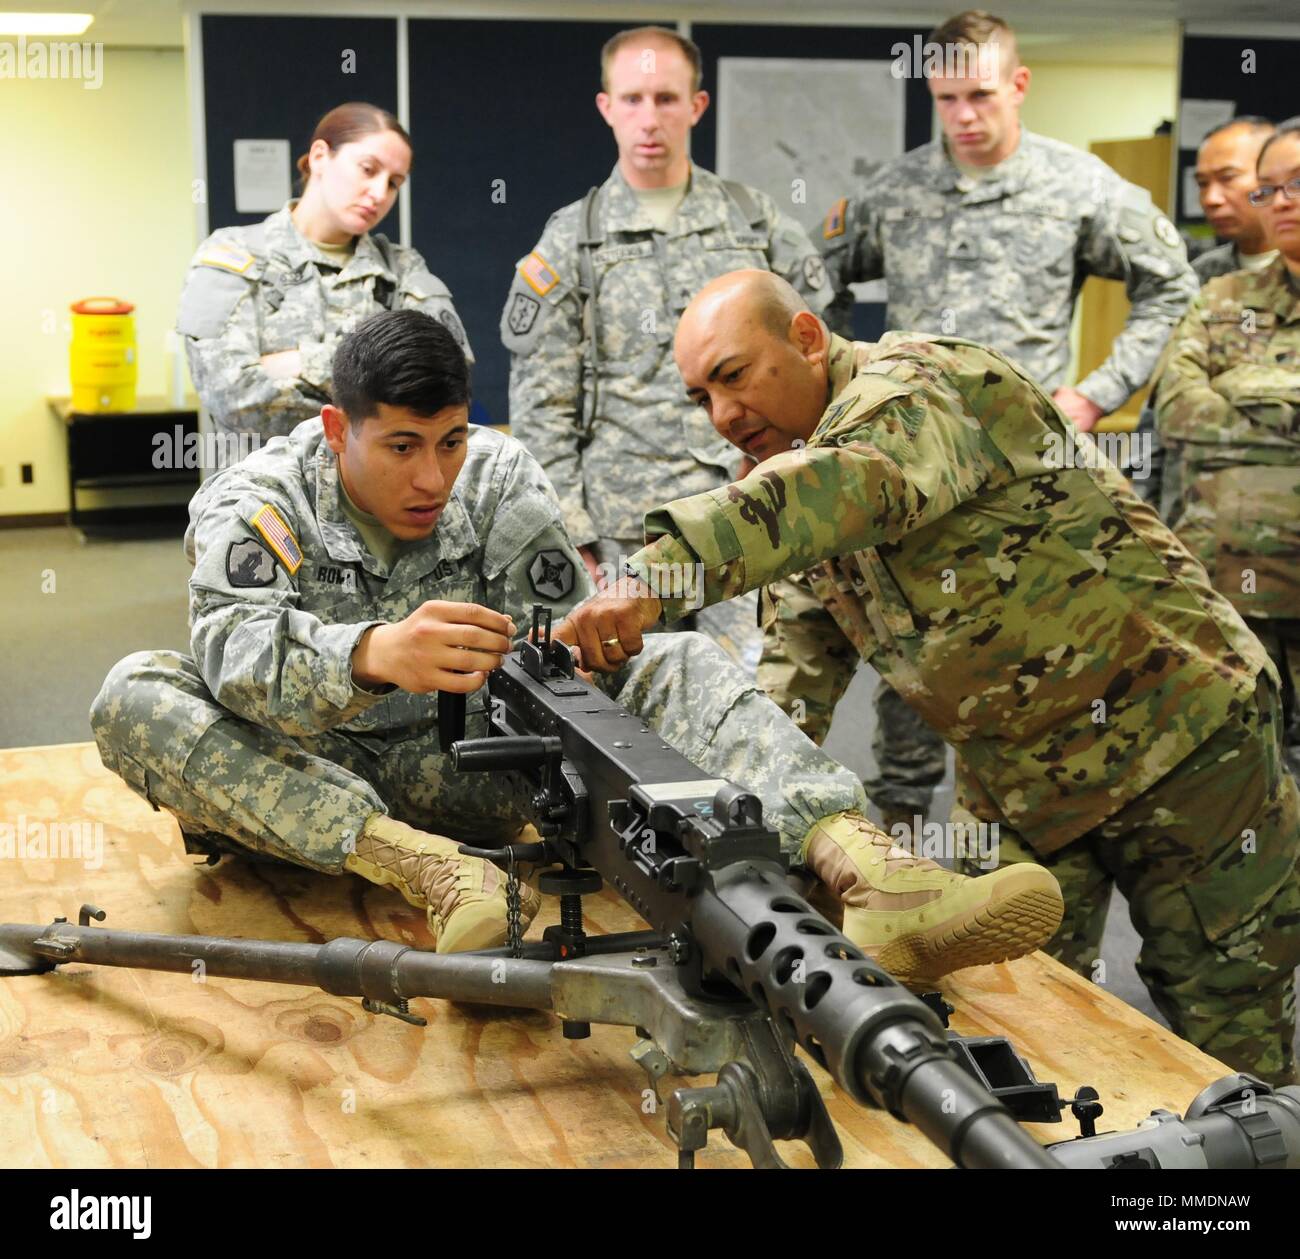 U.S. Army Reserve Sgt. Freddie Roman-Casiano, movement transportation coordinator, 382nd Combat Service Support Battalion out of Tacoma, Wash., receives primary marksmanship instruction on an M2A1 machine gun from Staff Sgt. Jesus Valles, 208th Transportation Company out of Marana, Ariz., and a primary marksmanship instructor for Task Force Coyote, during Operation Cold Steel II at Fort Hunter Liggett, Calif., Oct. 18, 2017.  Operation Cold Steel is the U.S. Army Reserve’s crew-served weapons qualification and validation exercise to ensure that America’s Army Reserve units and Soldiers are tra Stock Photo